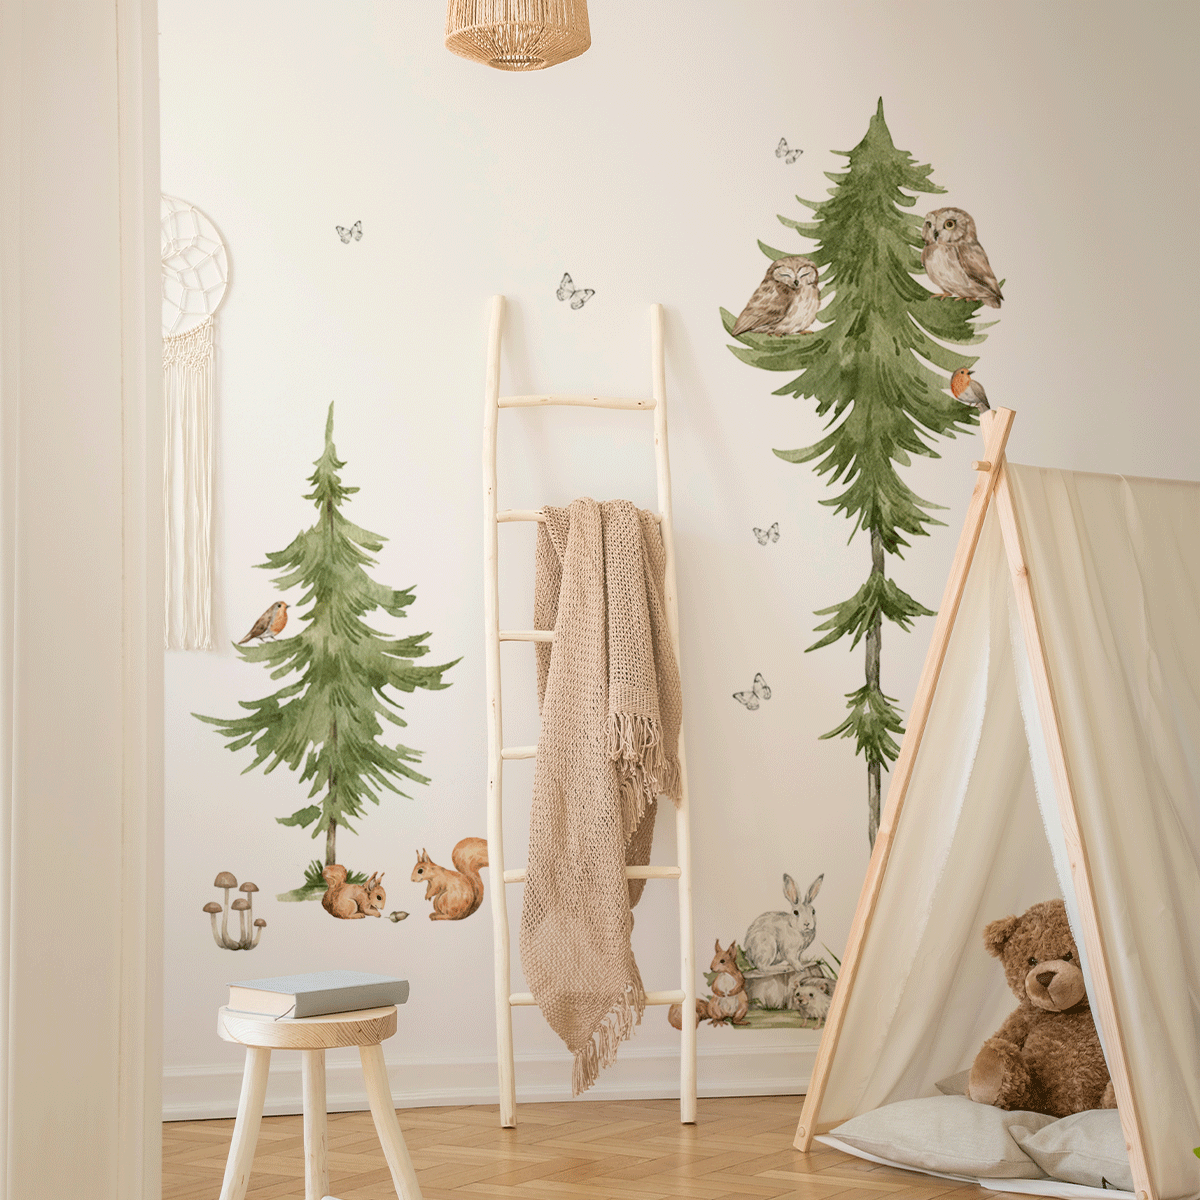 Woodland wall stickers - Magical forest - trees with forest animals